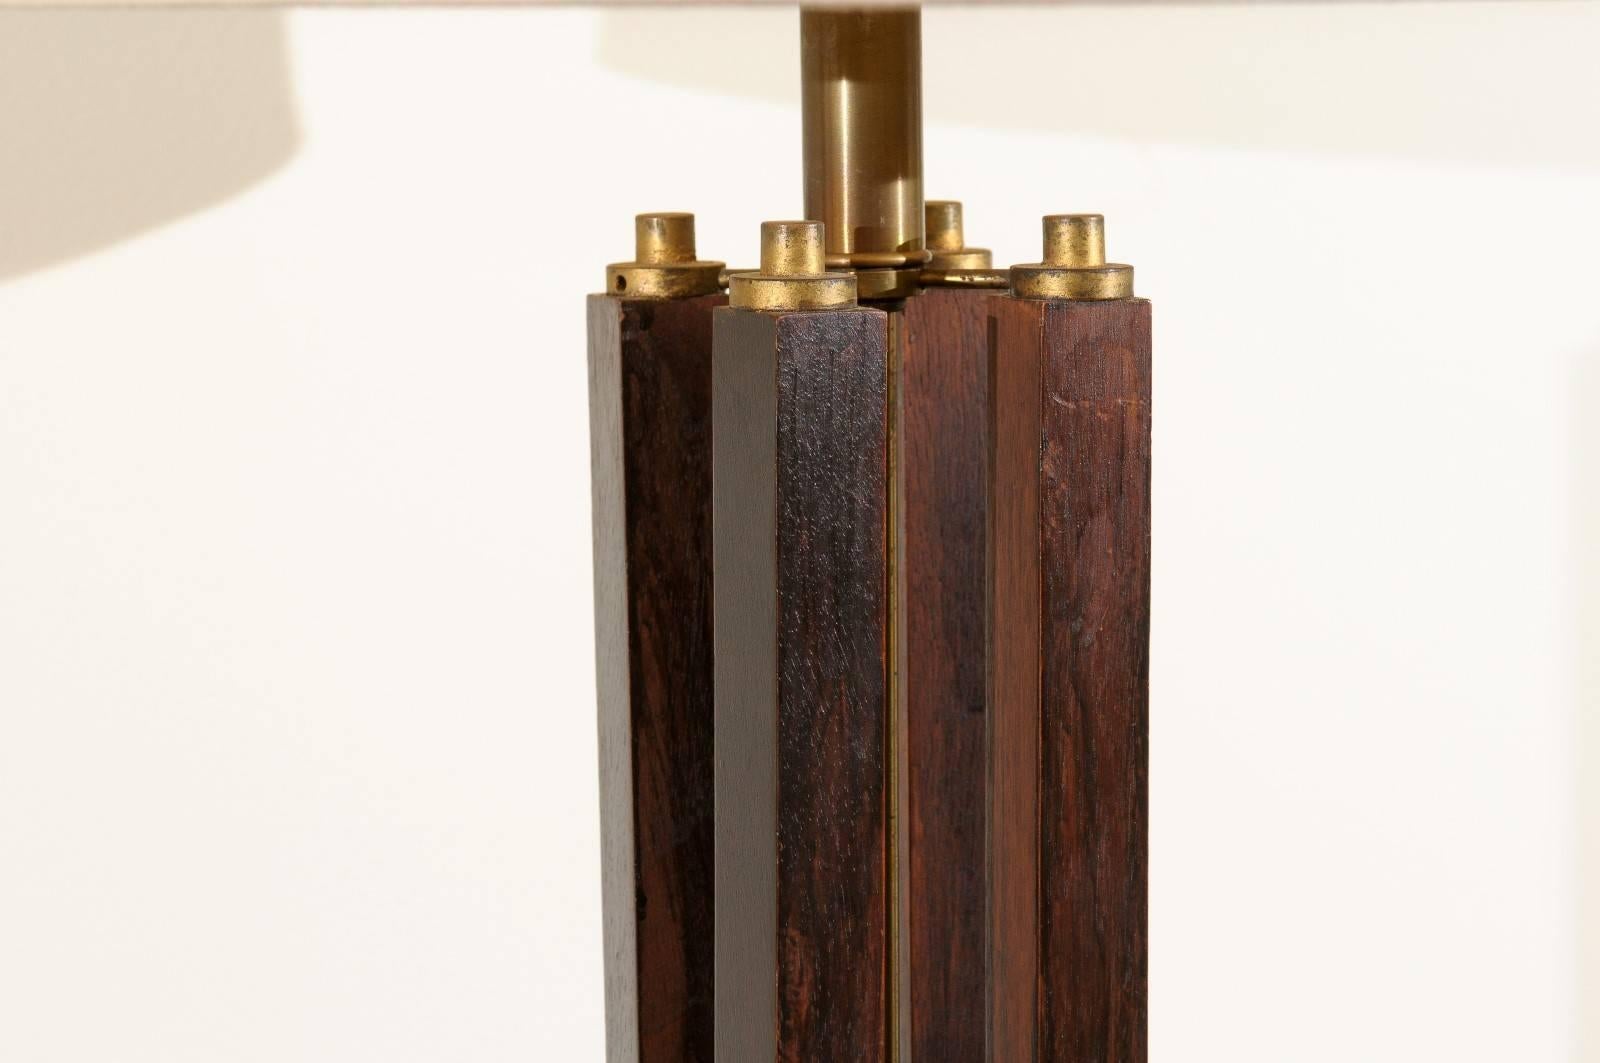 Dramatic Pair of Large-Scale Walnut and Brass Lamps by Laurel, circa 1970 In Excellent Condition For Sale In Atlanta, GA